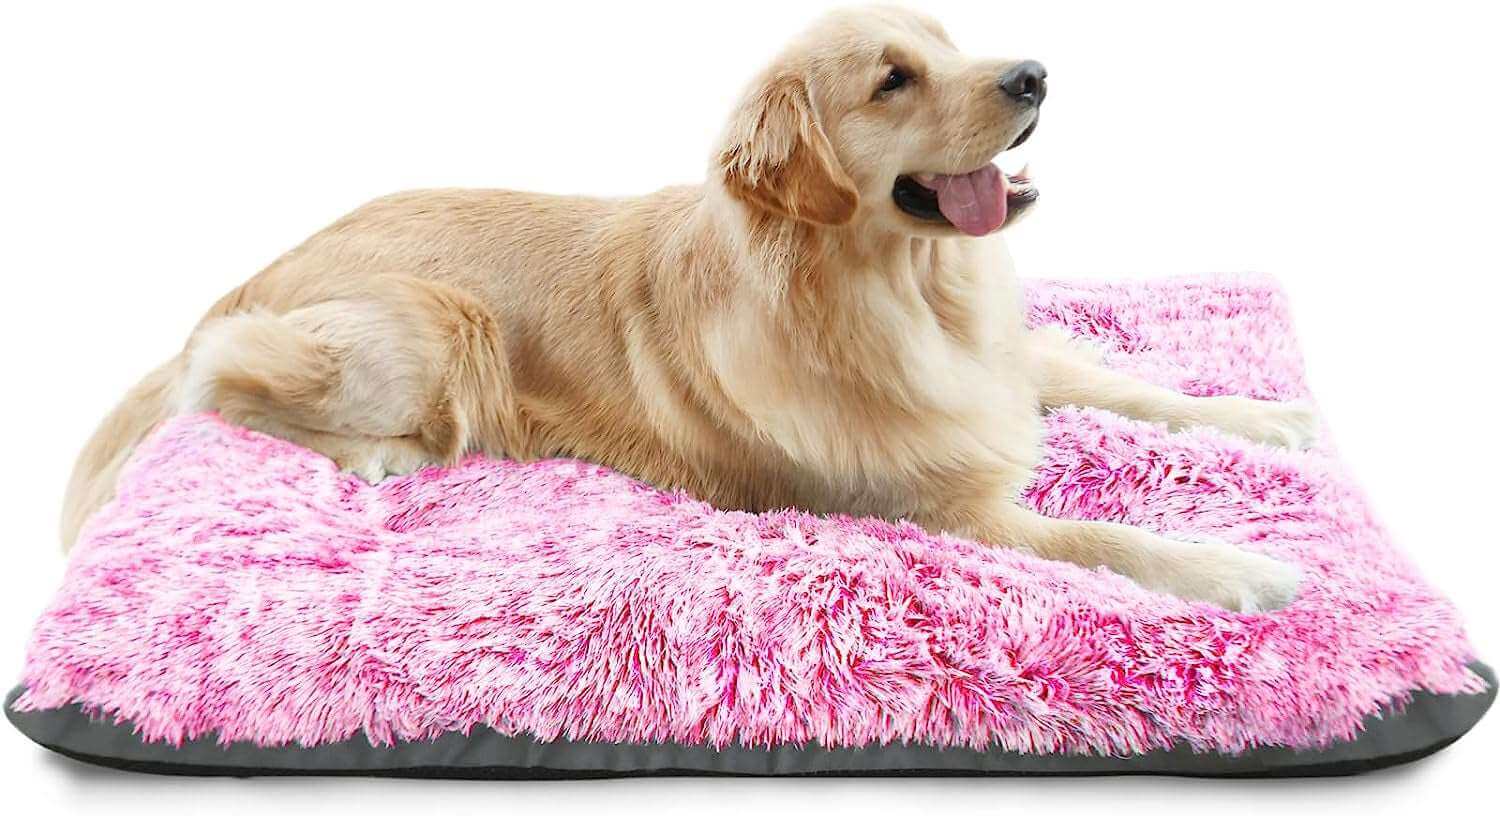 Dog Beds for Large Dogs Fixable Deluxe Cozy Dog Kennel Beds for Crates Washable